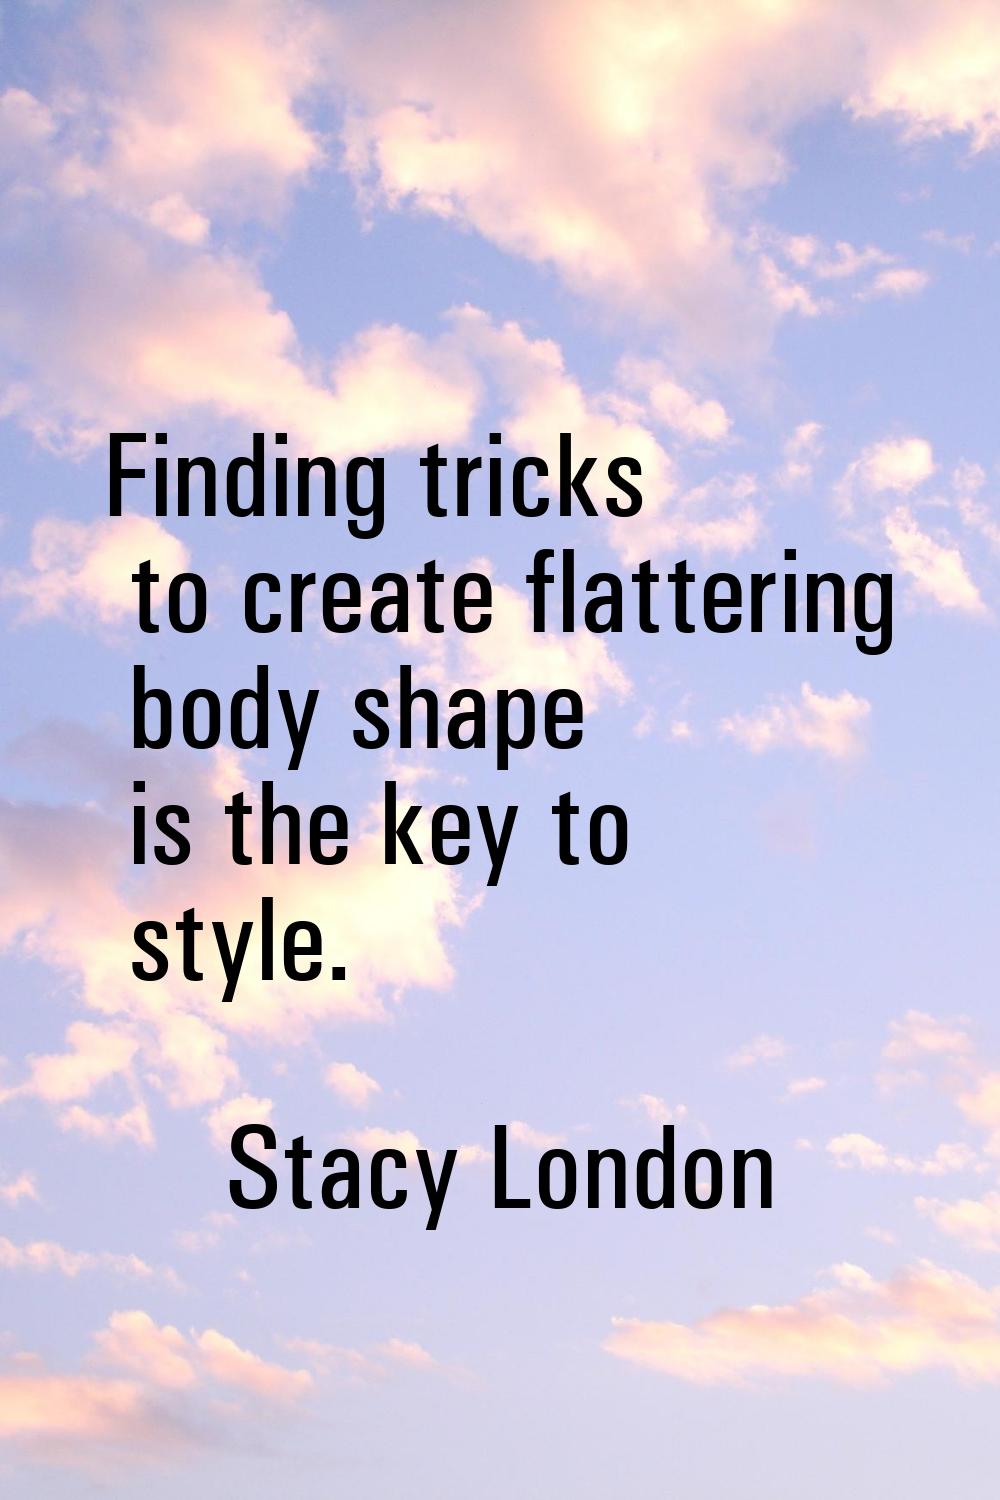 Finding tricks to create flattering body shape is the key to style.